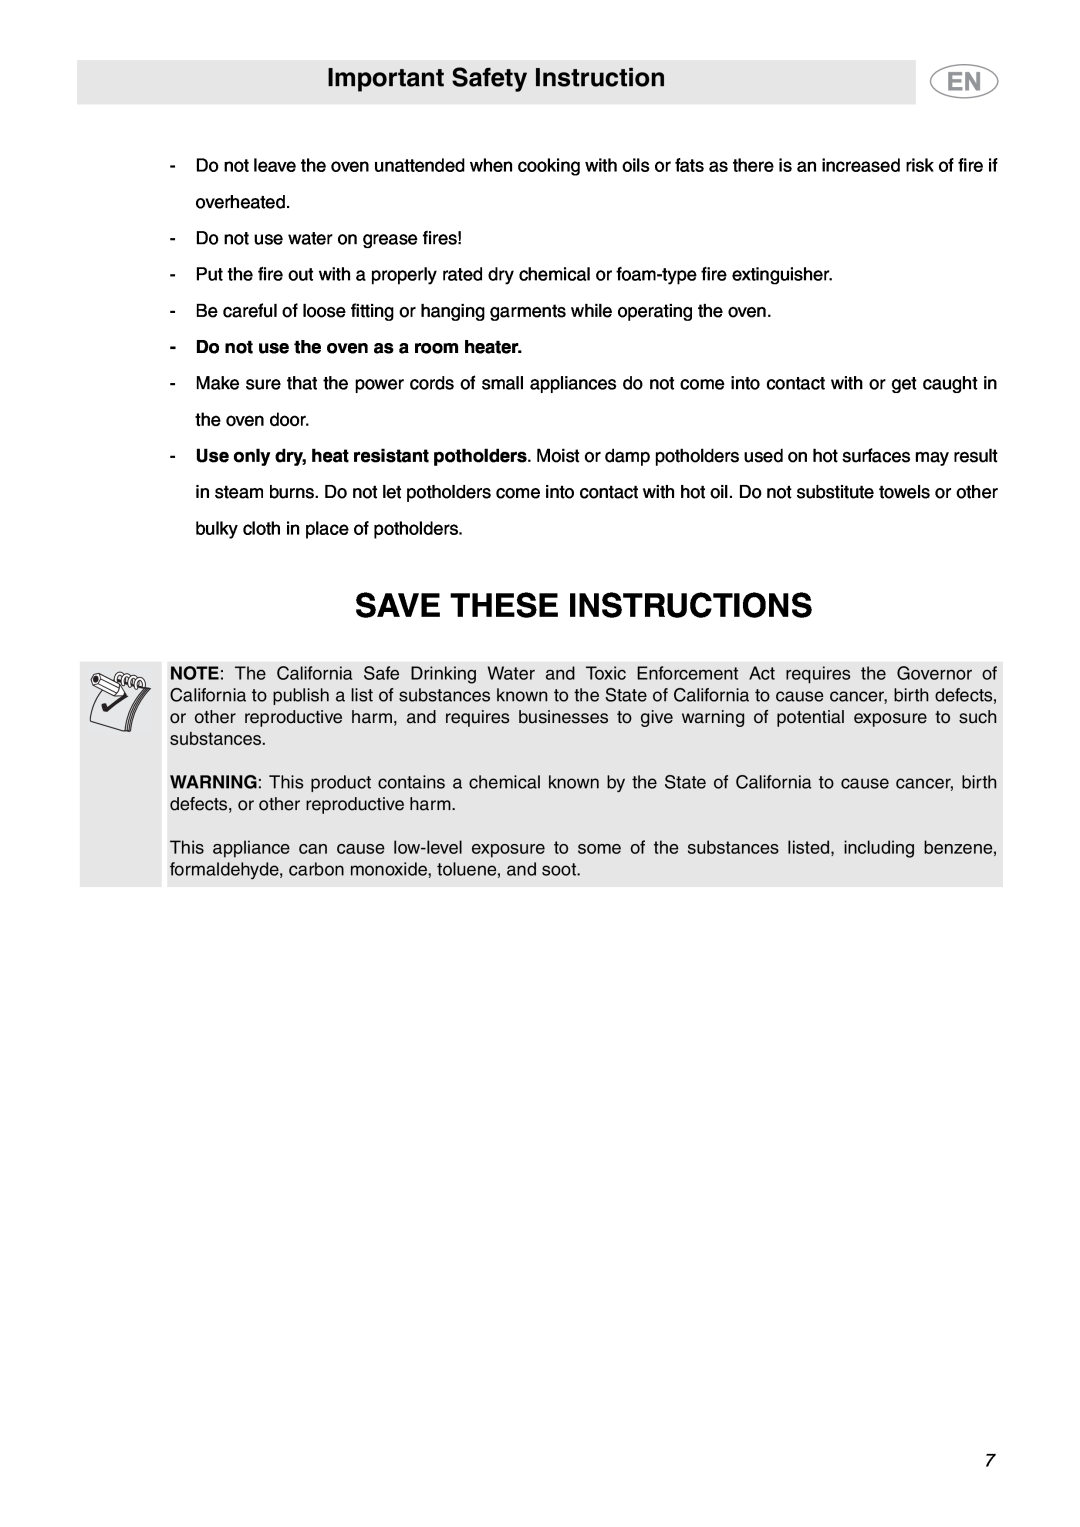 Smeg SC770U Do not use the oven as a room heater, Save These Instructions, Important Safety Instruction 